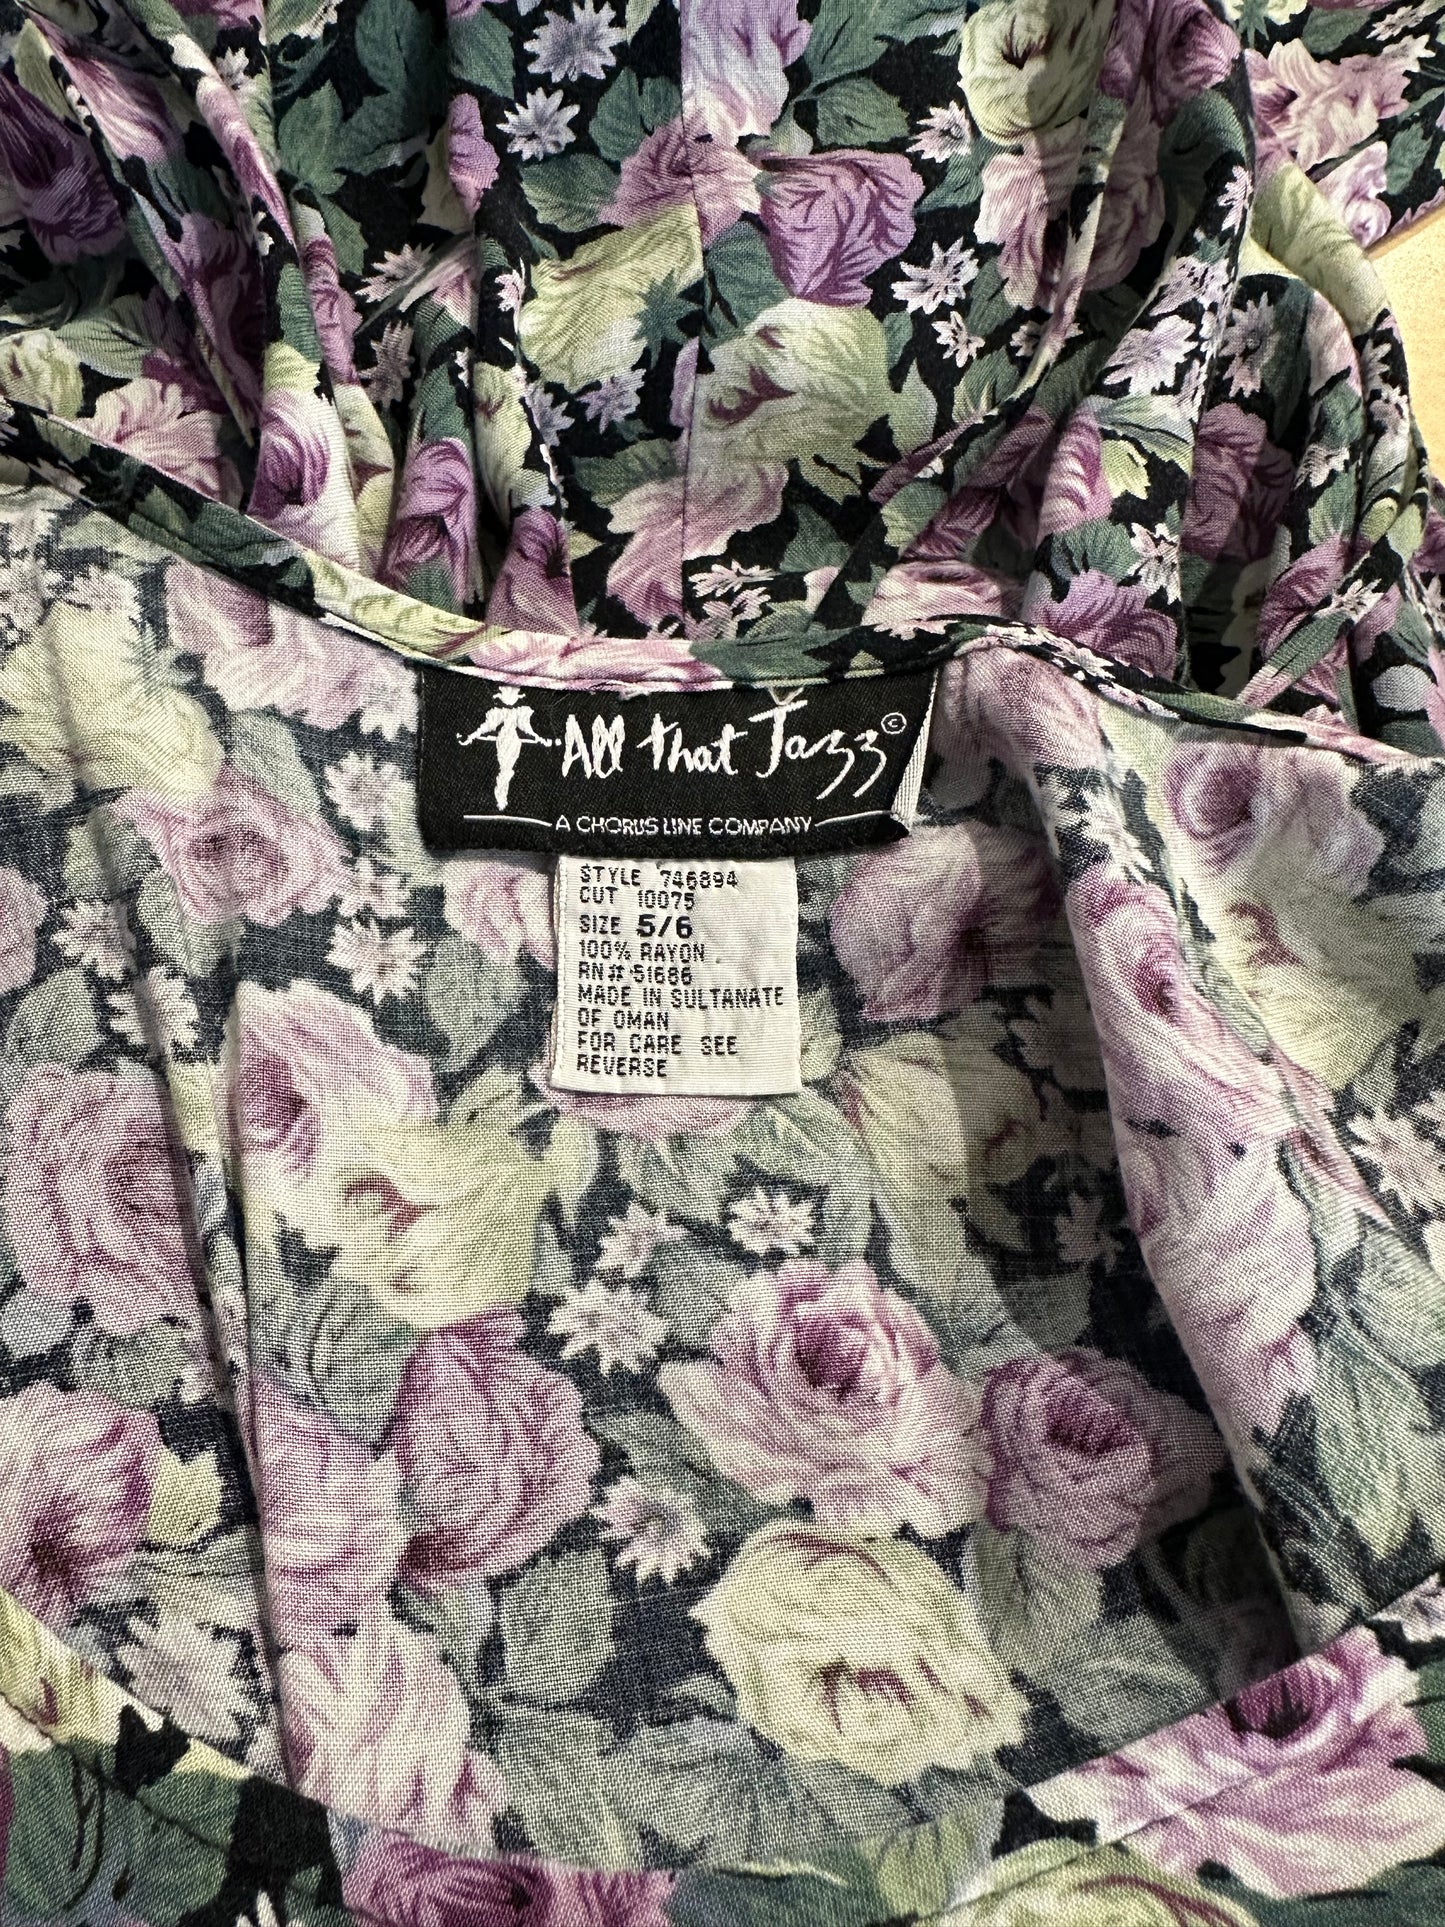 90s 'All That Jazz' Purple Floral Rayon Dress / Small